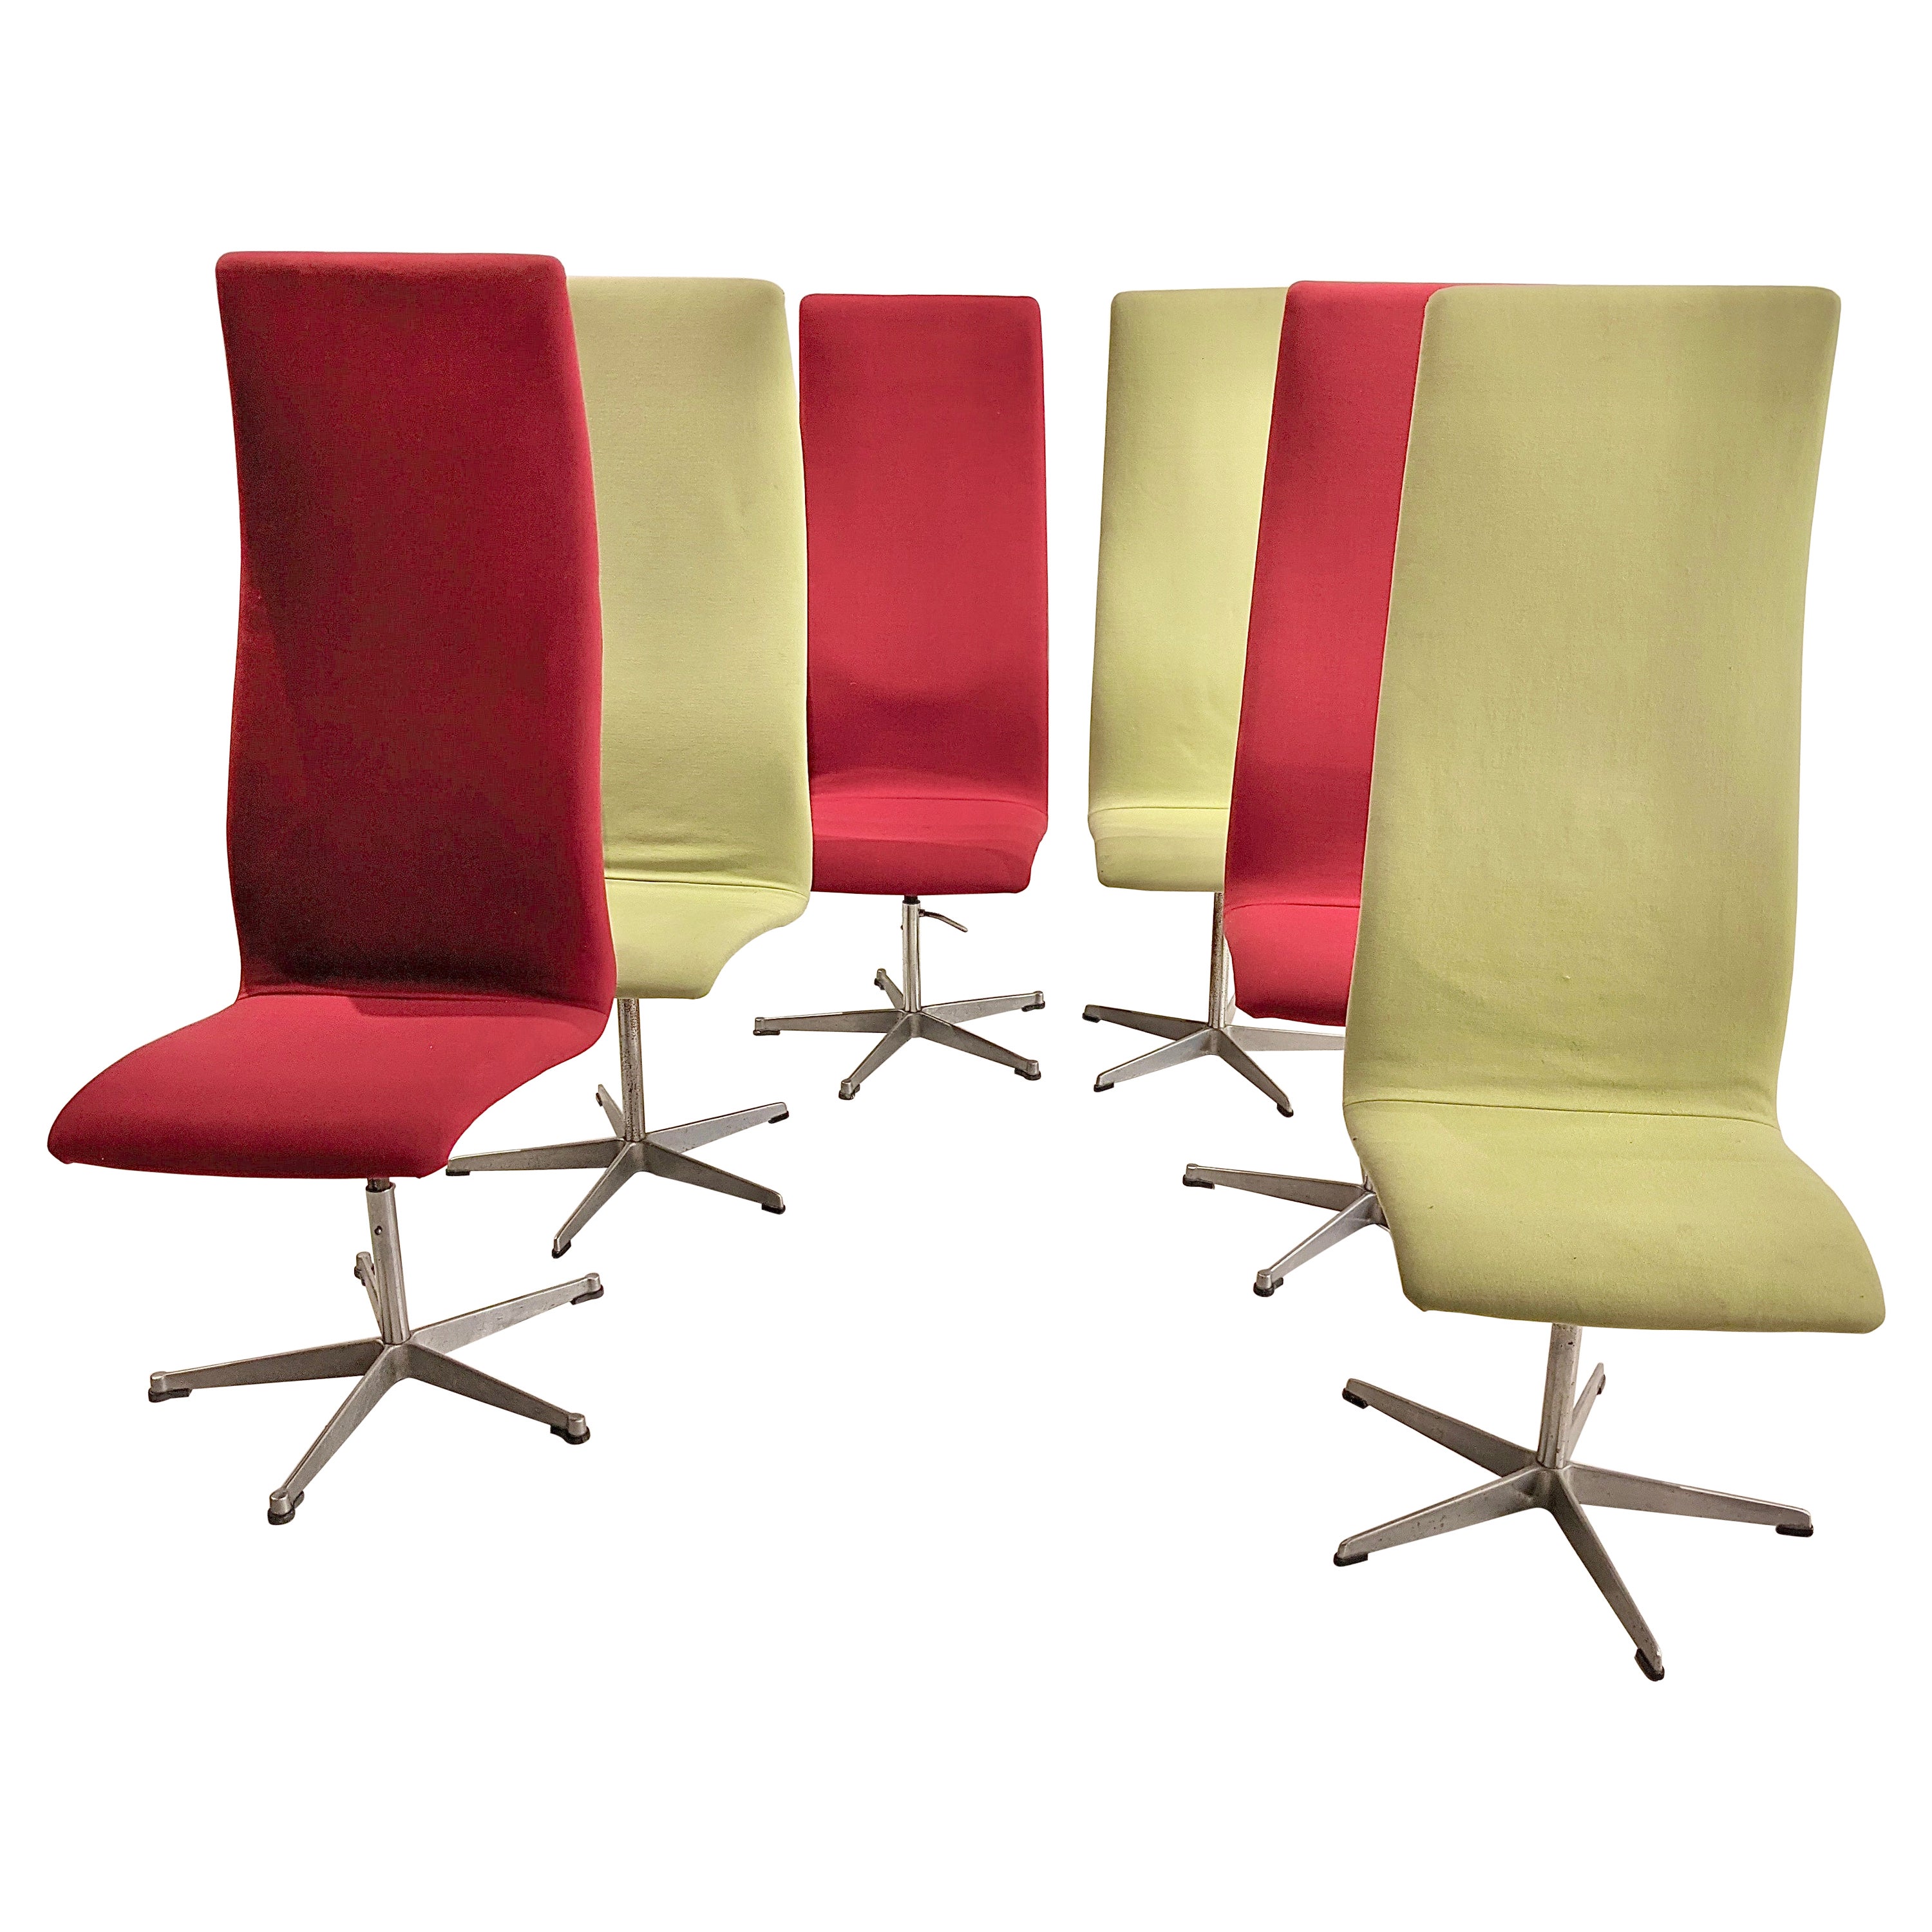 Set of 6 Oxford chairs by Arne Jacobsen For Sale